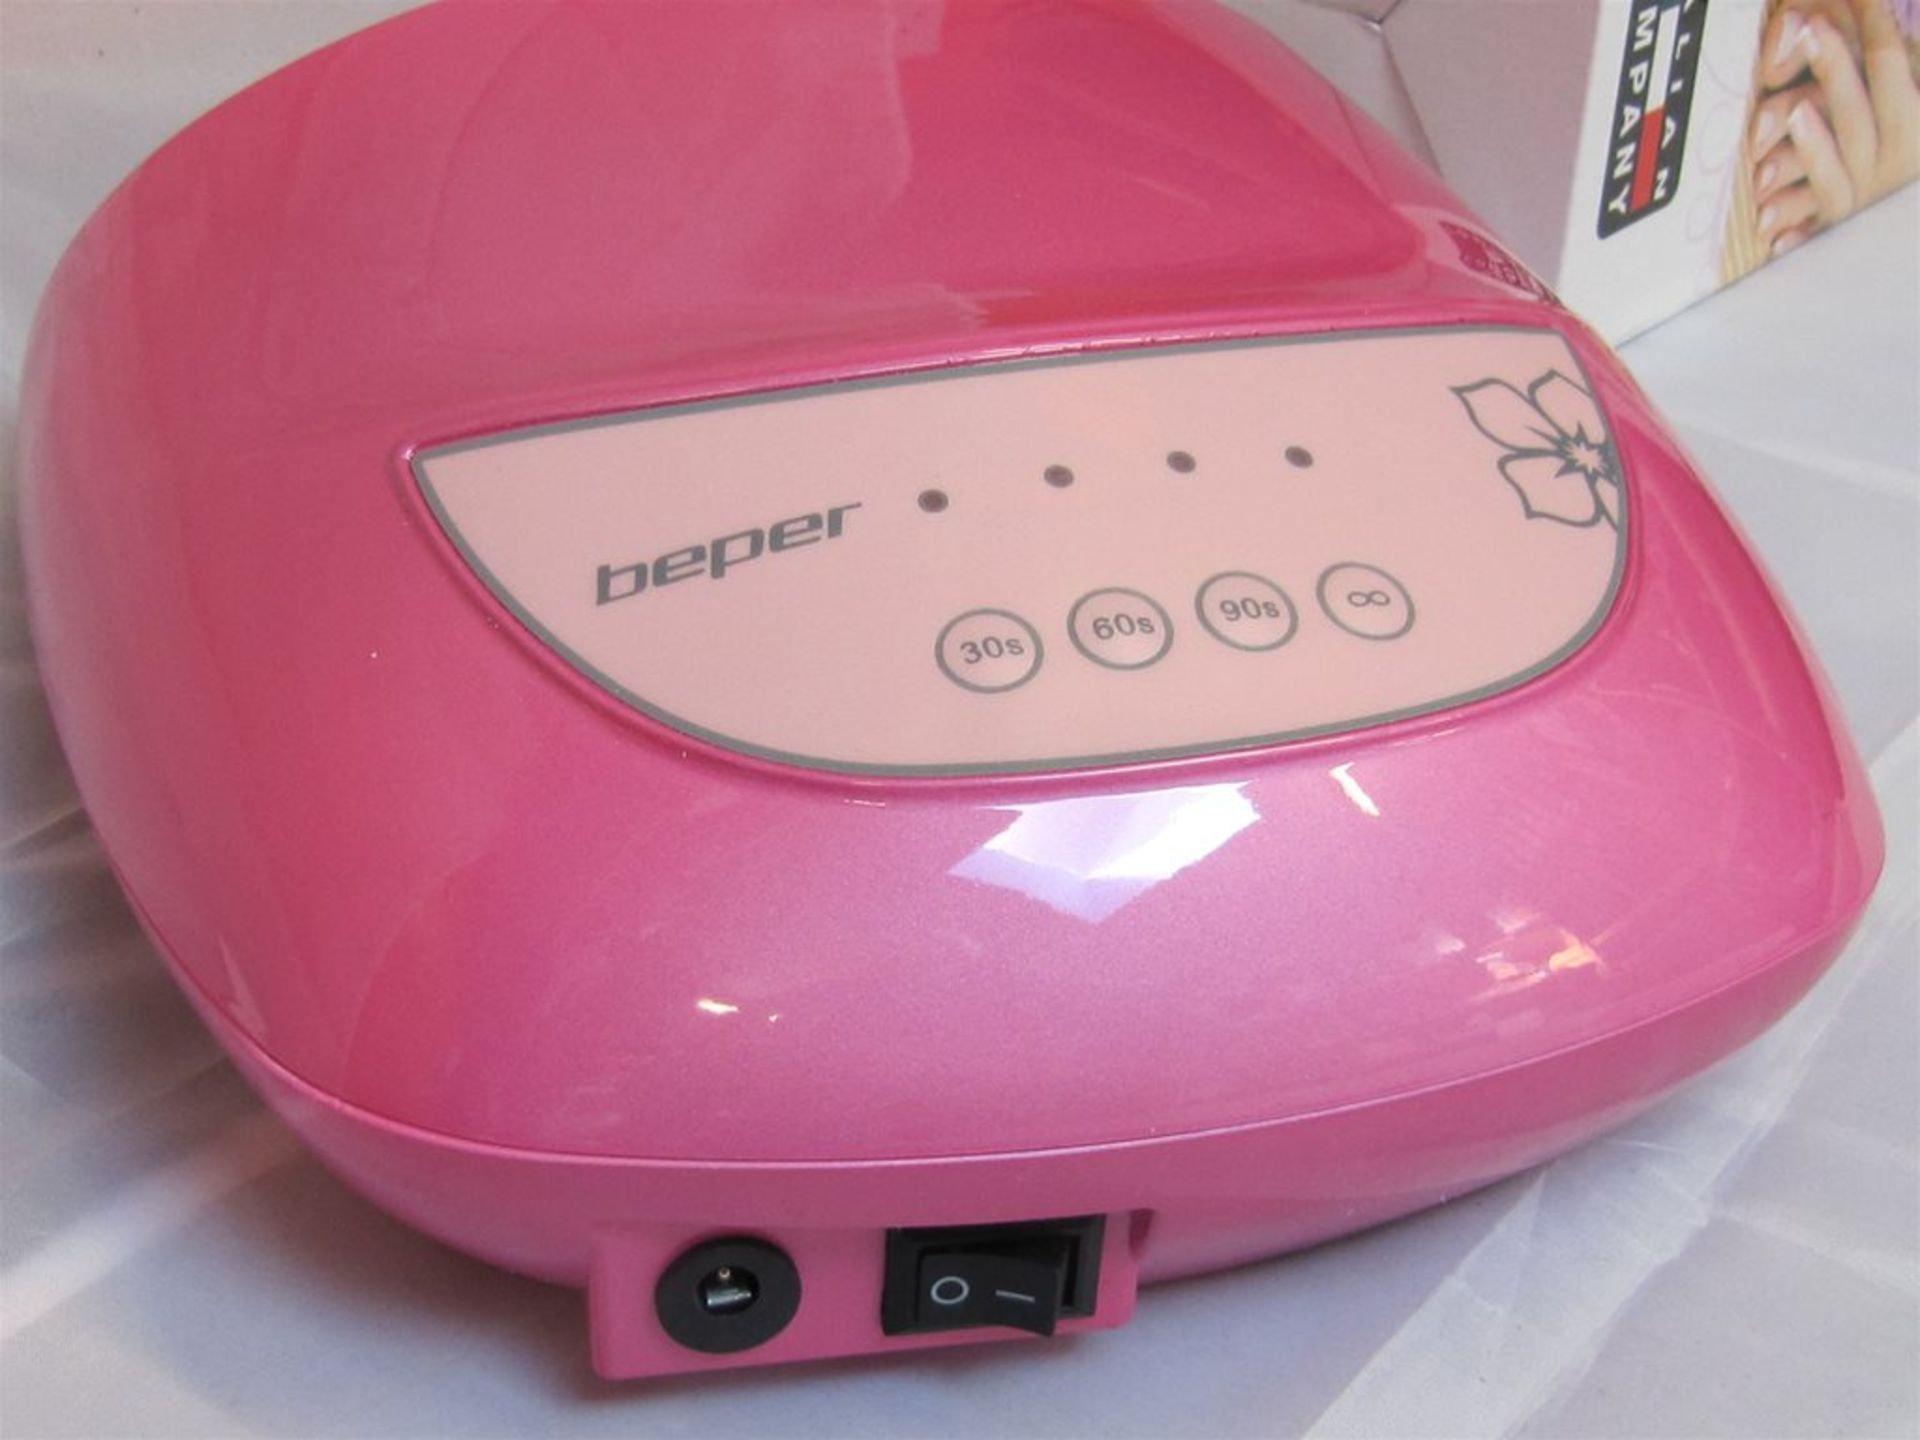 71) Beper LED Nail Lamp. 12w Rapid Dry Time. No vat on Hammer. - Image 2 of 4